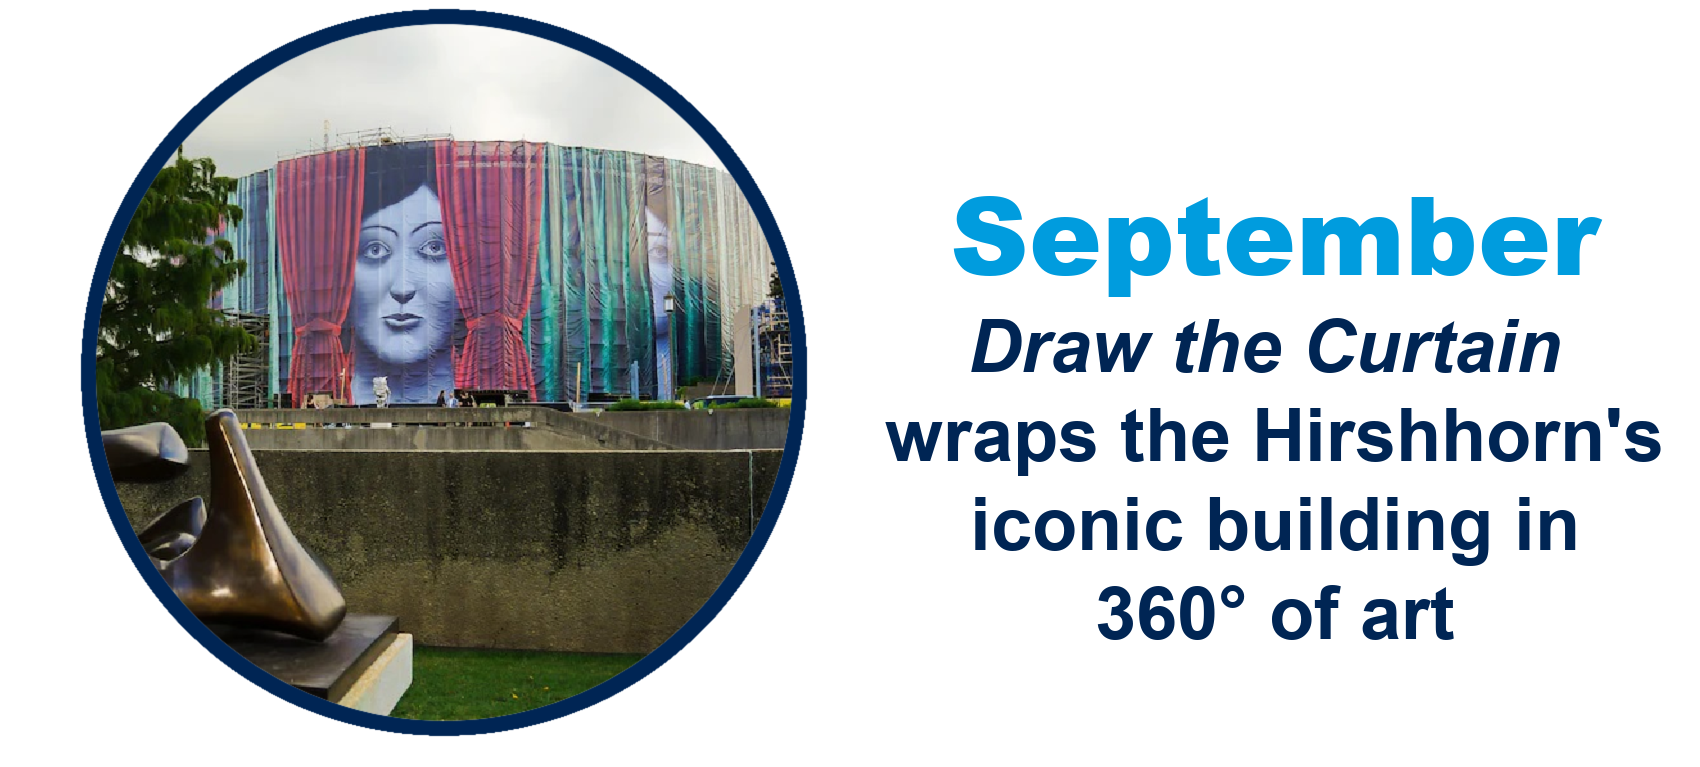 Draw the Curtain wraps the Hirshhorn's iconic building in art